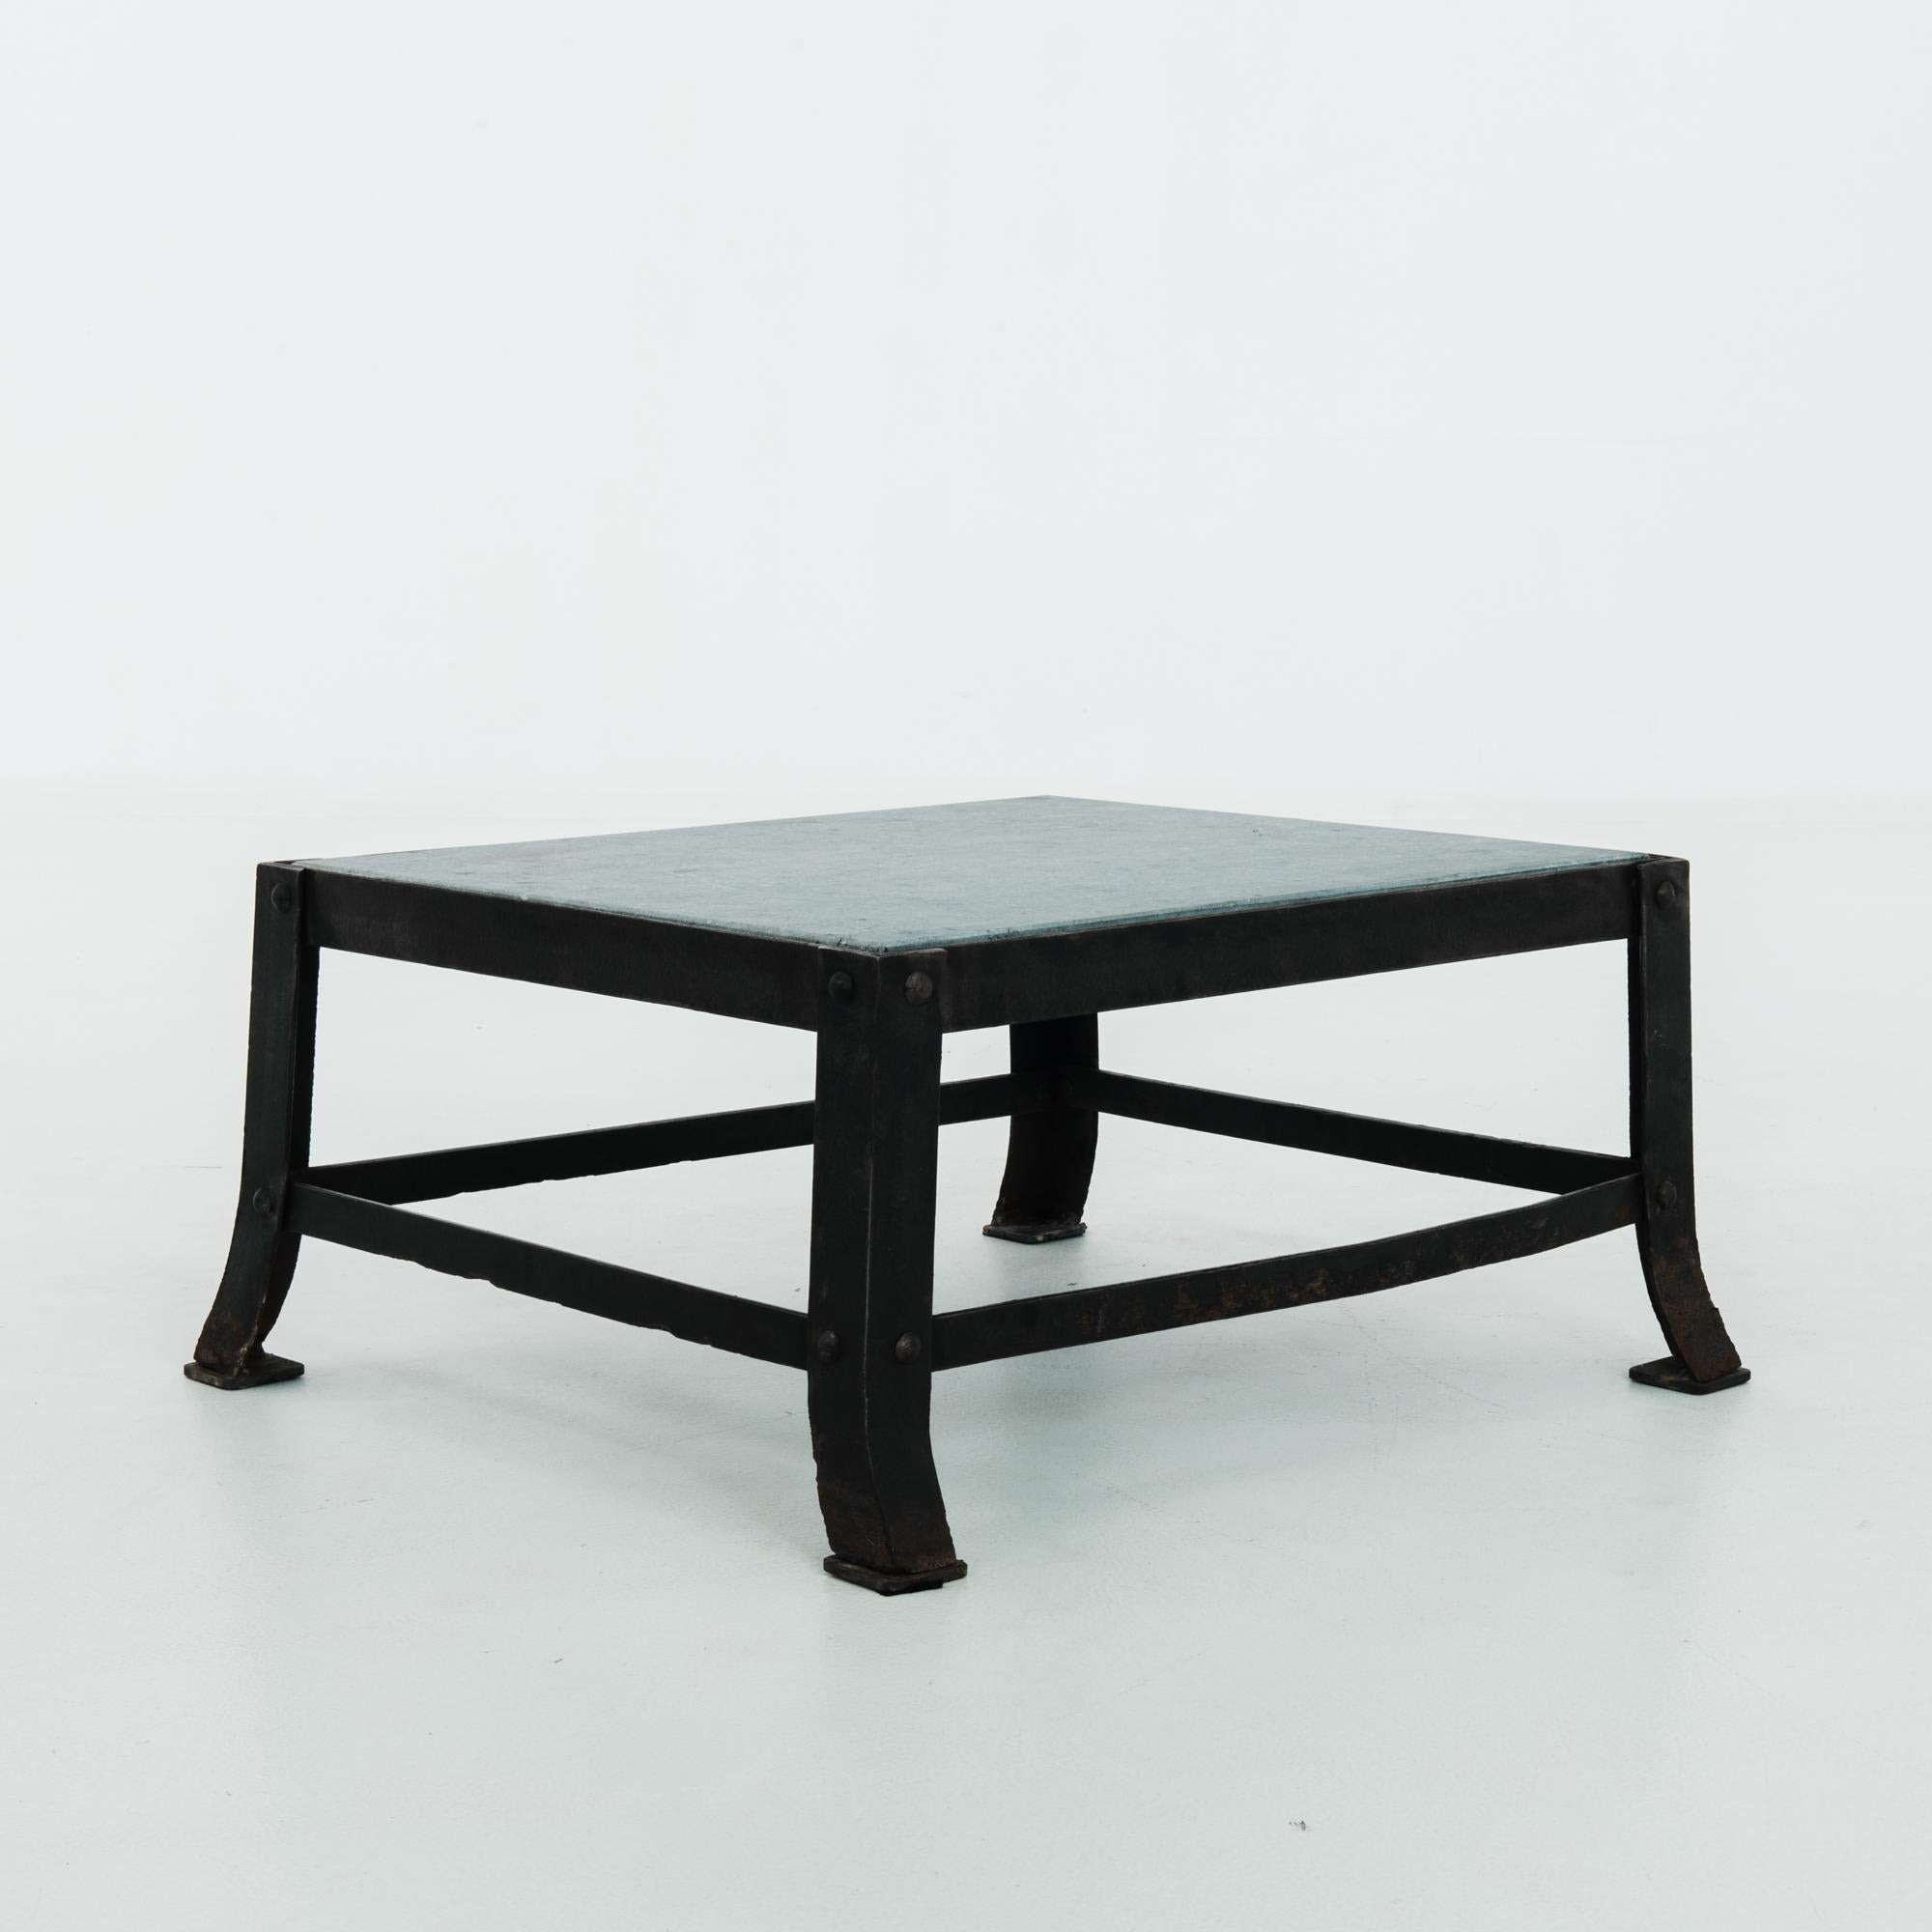 Belgian Industrial Riveted Coffee Table with Stone Top